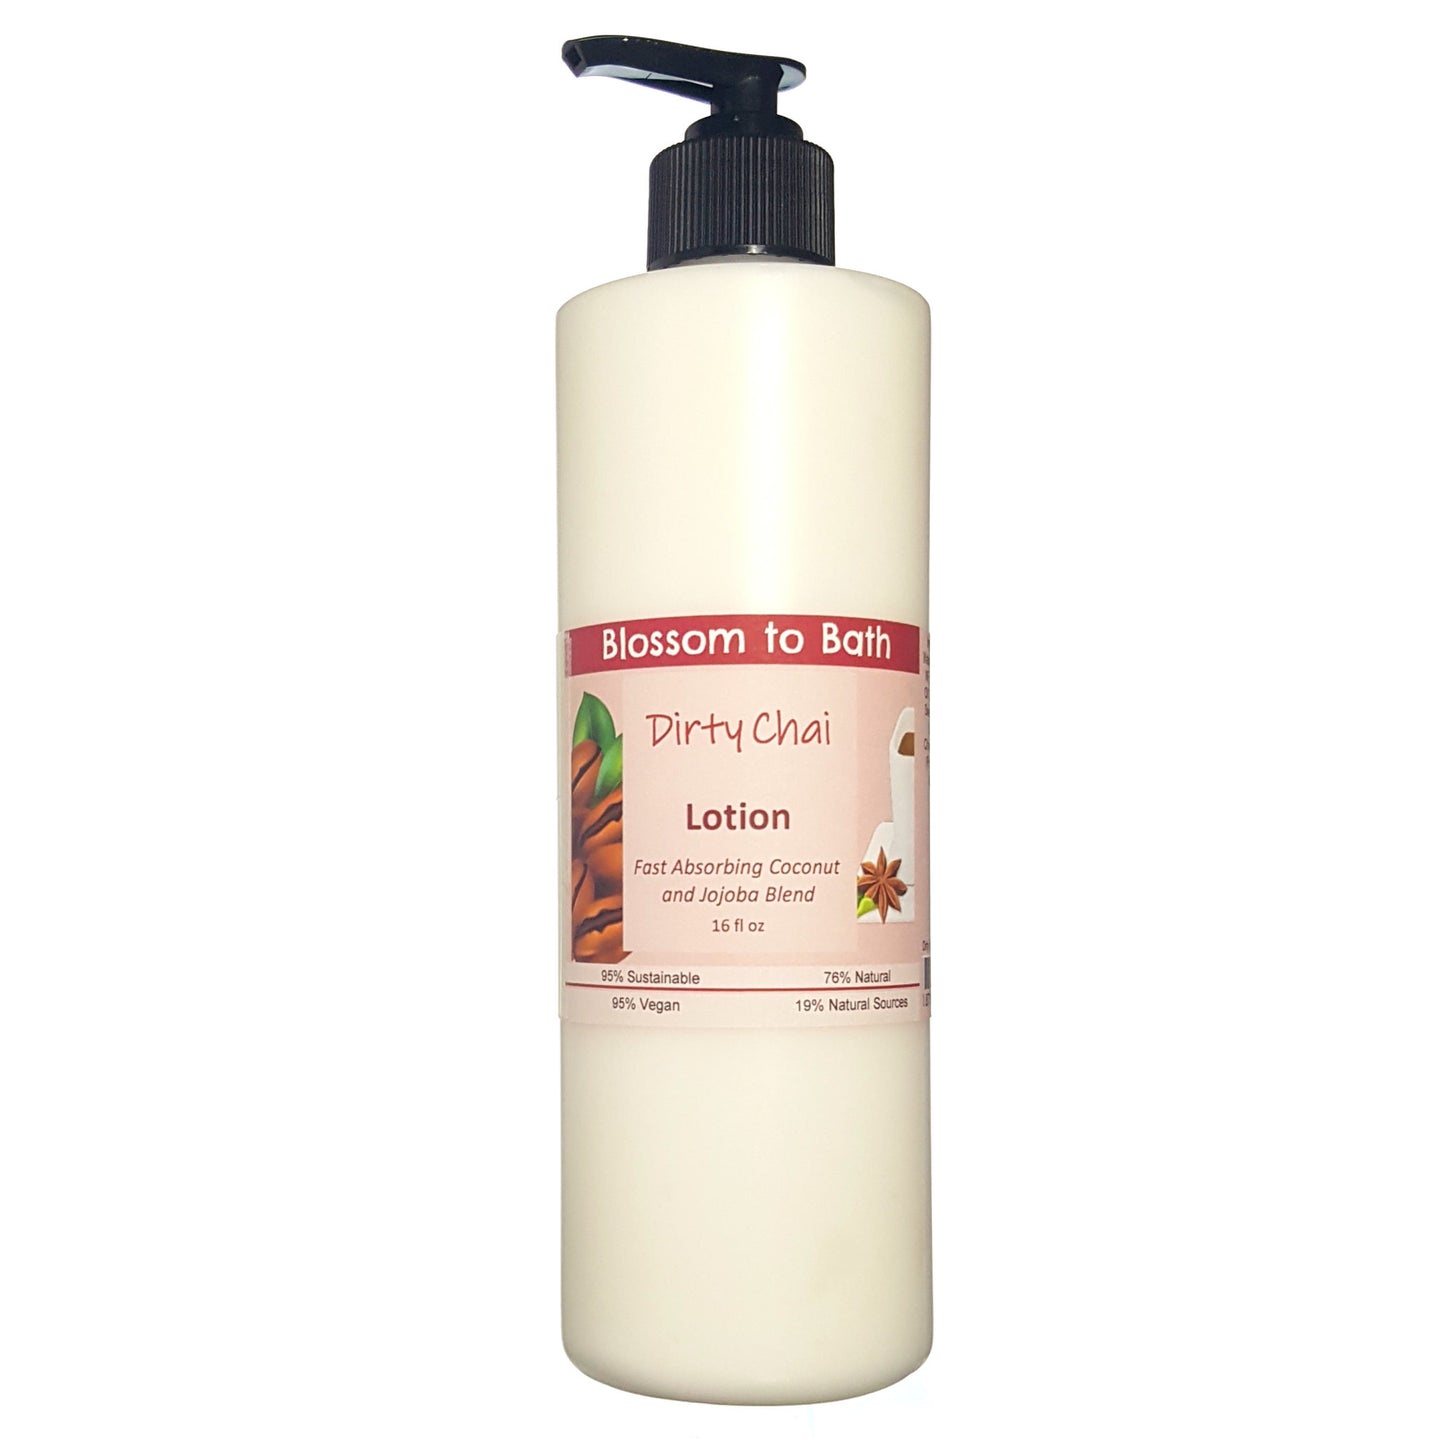 Buy Blossom to Bath Dirty Chai Lotion from Flowersong Soap Studio.  Daily moisture luxury that soaks in quickly made with organic oils and butters that soften and smooth the skin  A shot of rich espresso in a swirl of exotic warm clove and cardamom.